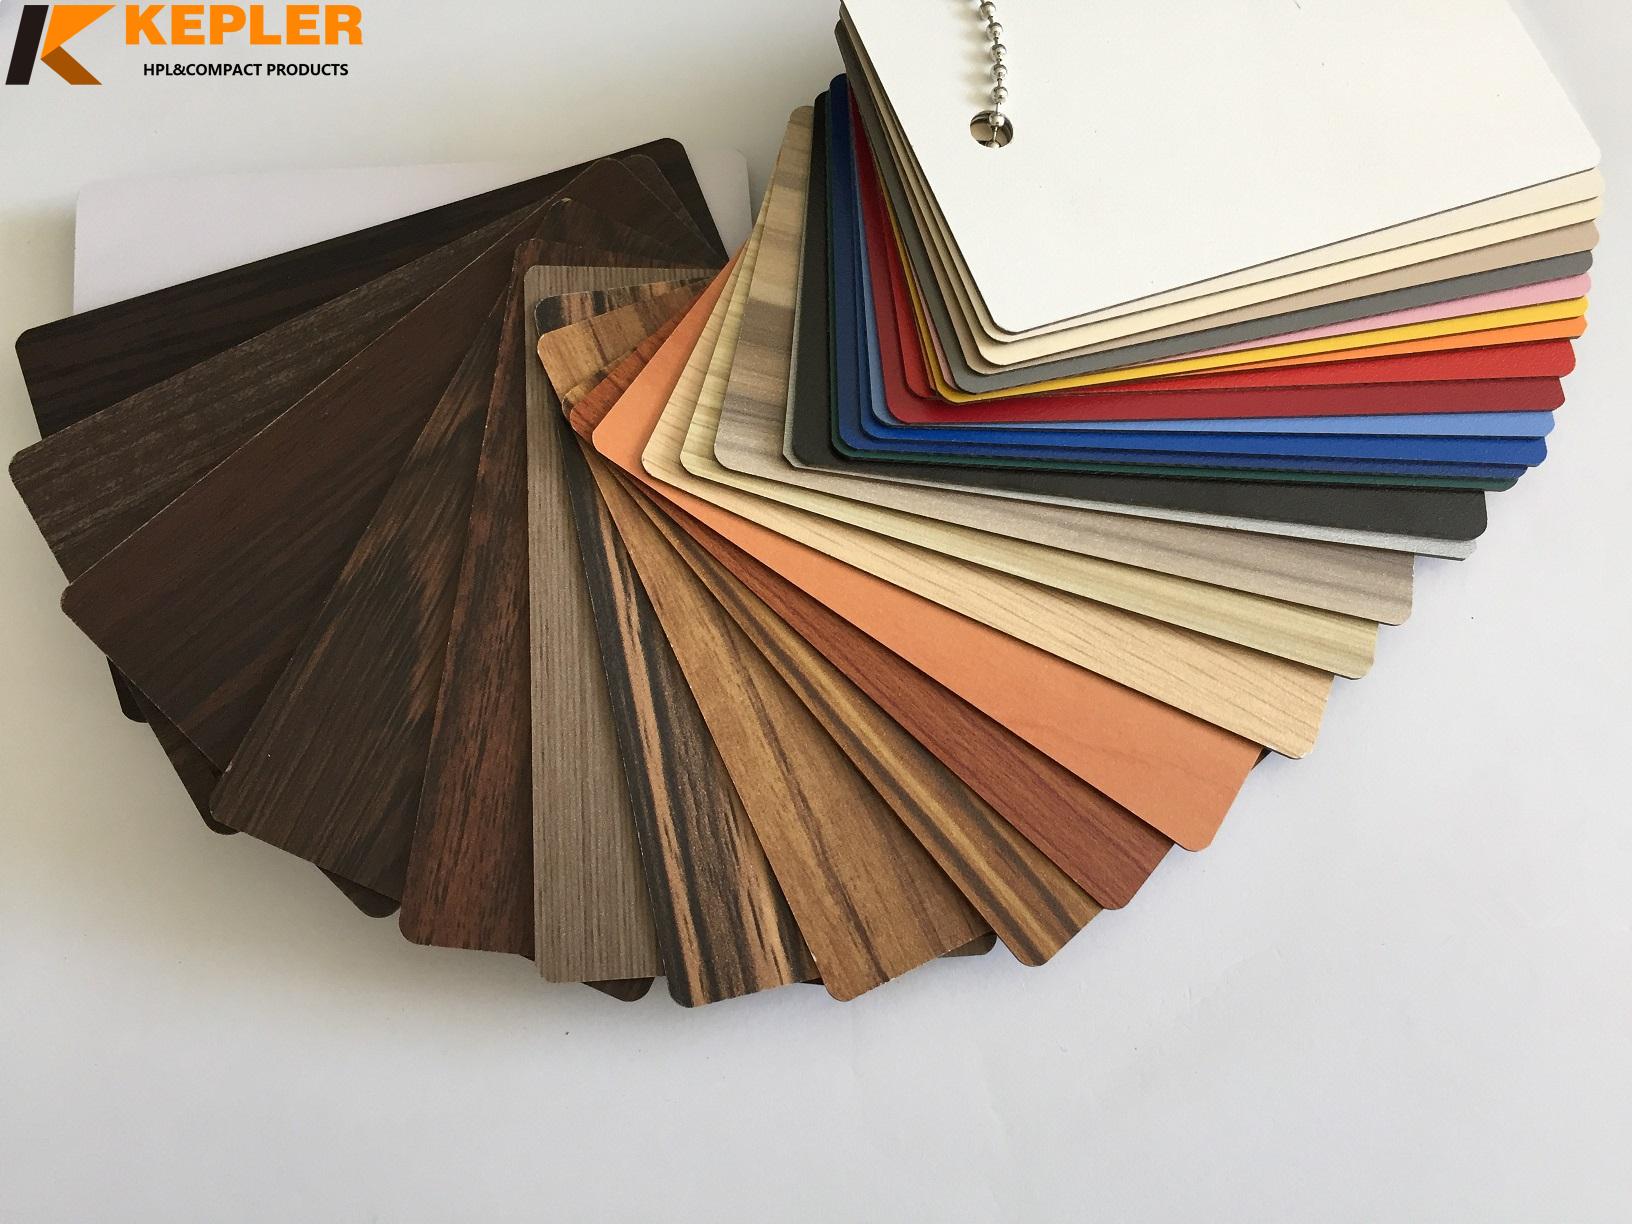 Kepler exterior rich colors waterproof anti-uv compact laminate HPL  table top board supplier in China